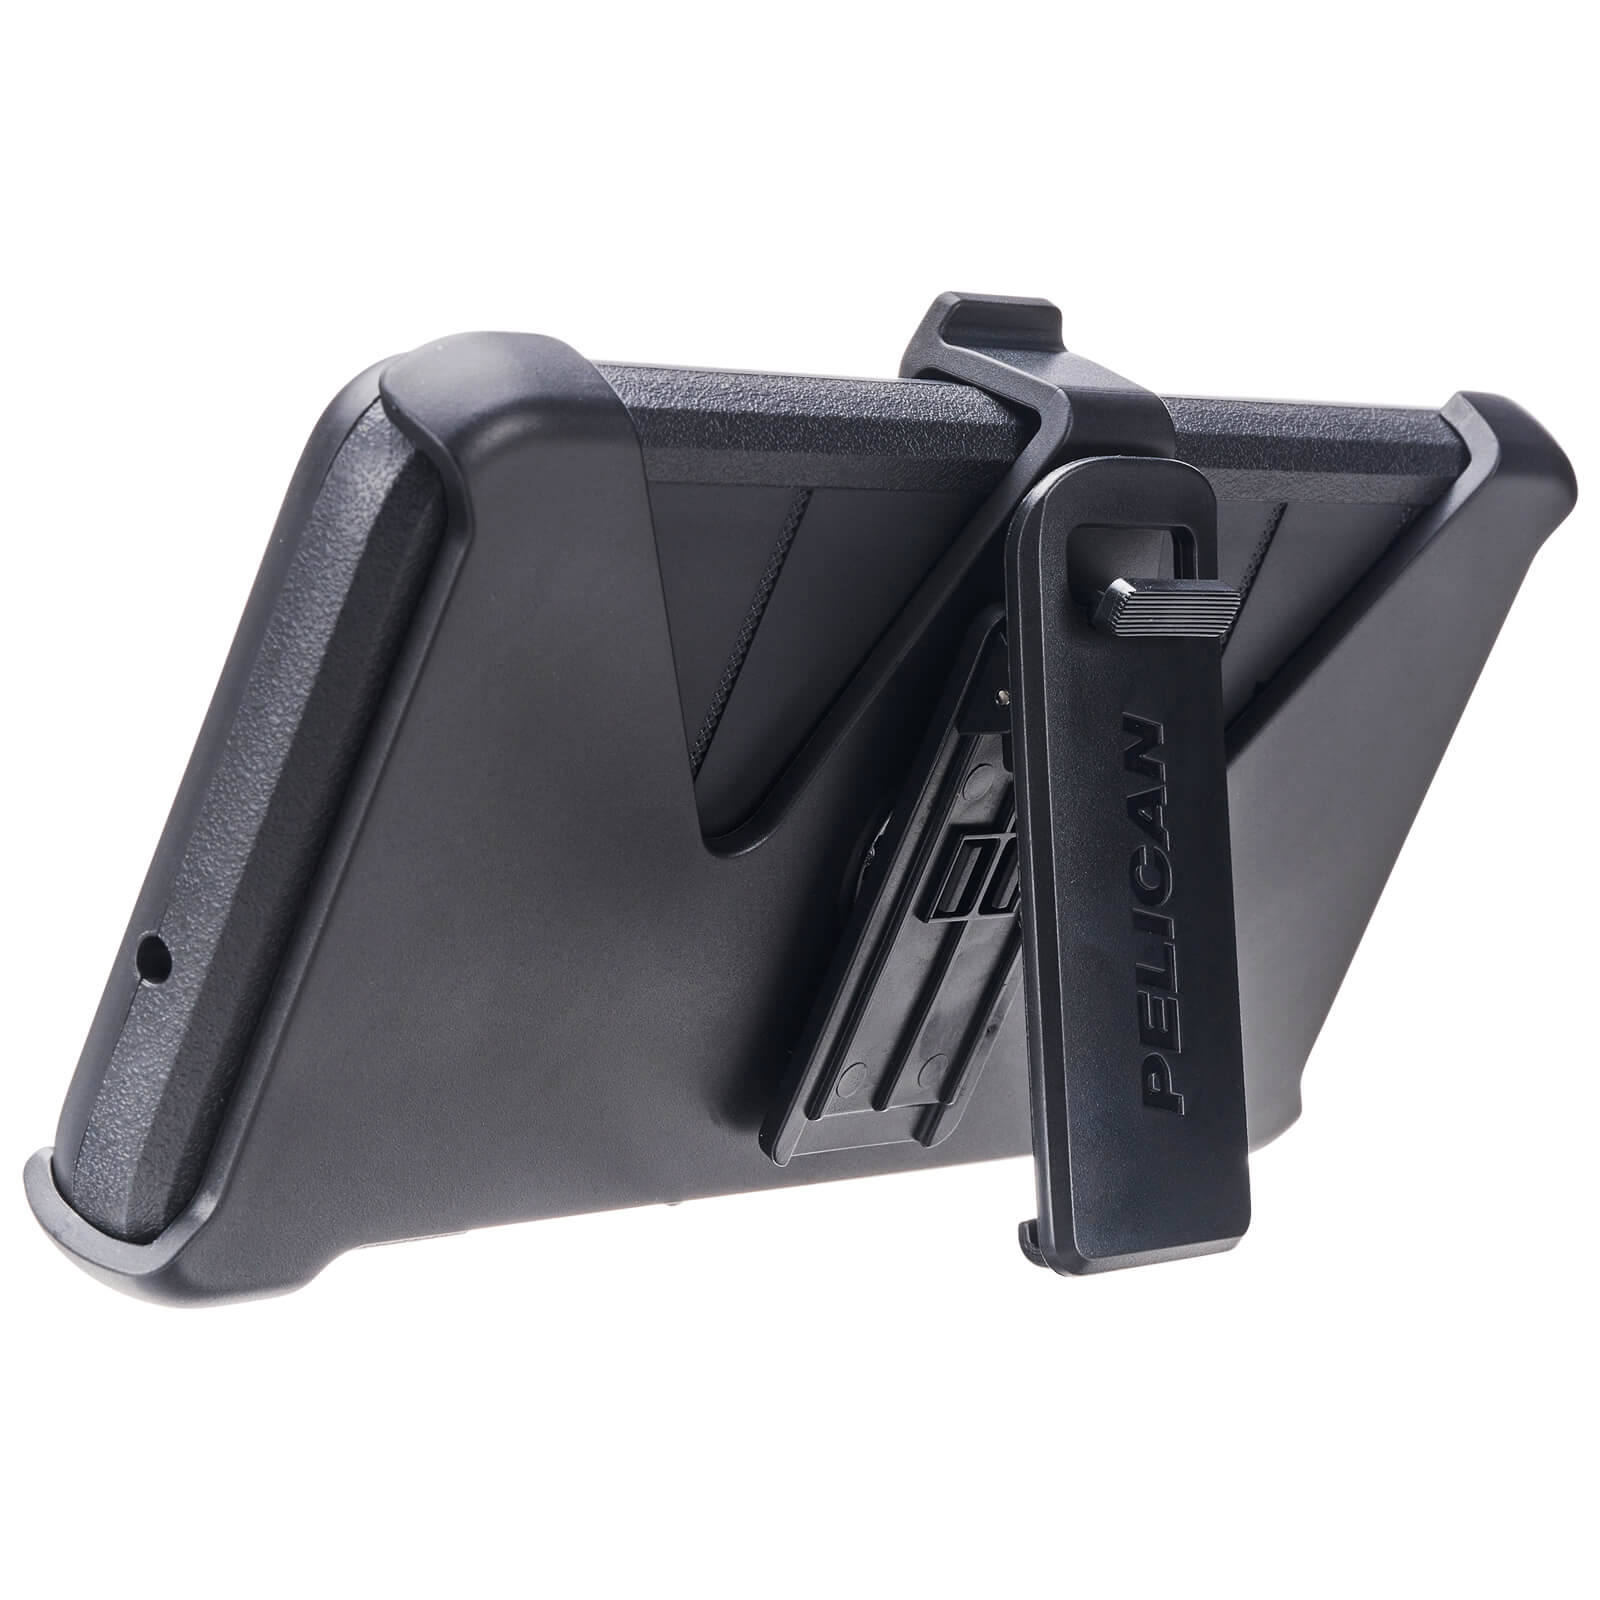 Holster clip included. color::Black